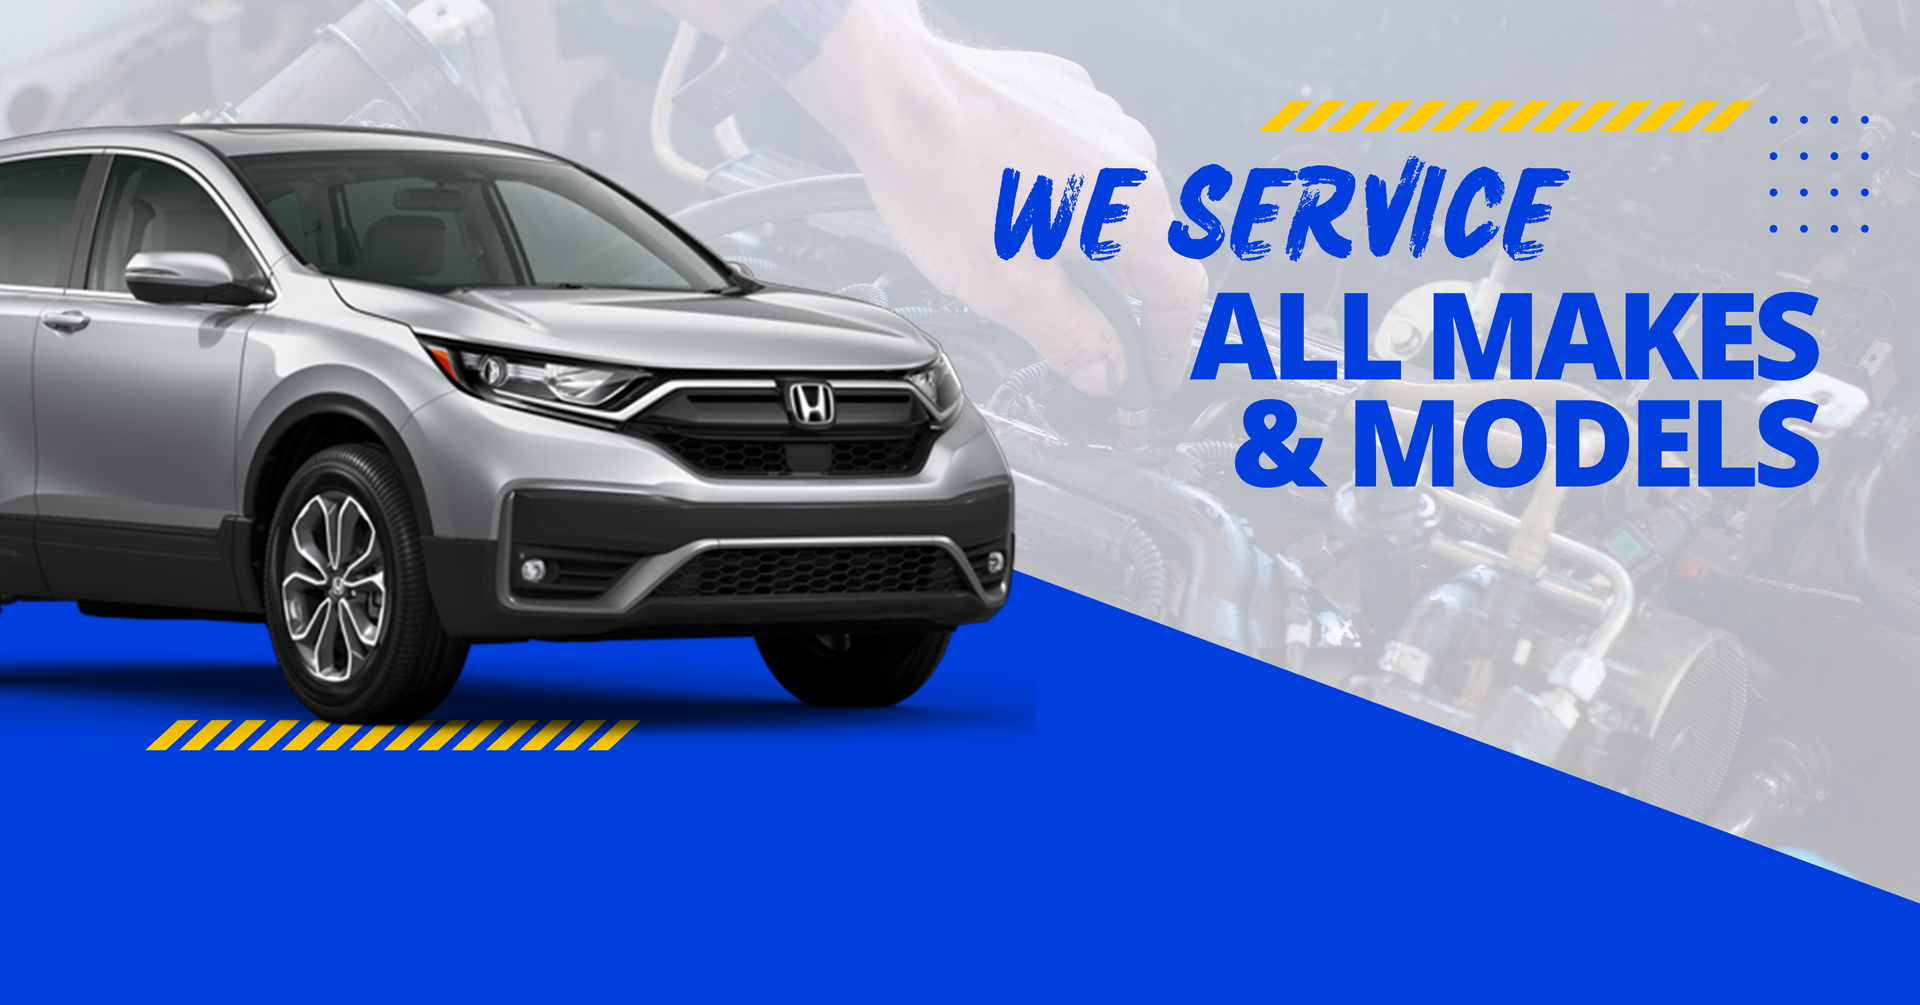 All makes and models service repair and fleet maintenance cincinnati ohio springdale fairfield oh west chester oh westchester OHIO 45069 franklin tn tennessee williamson county shopfix snyders car care snyderscarcare